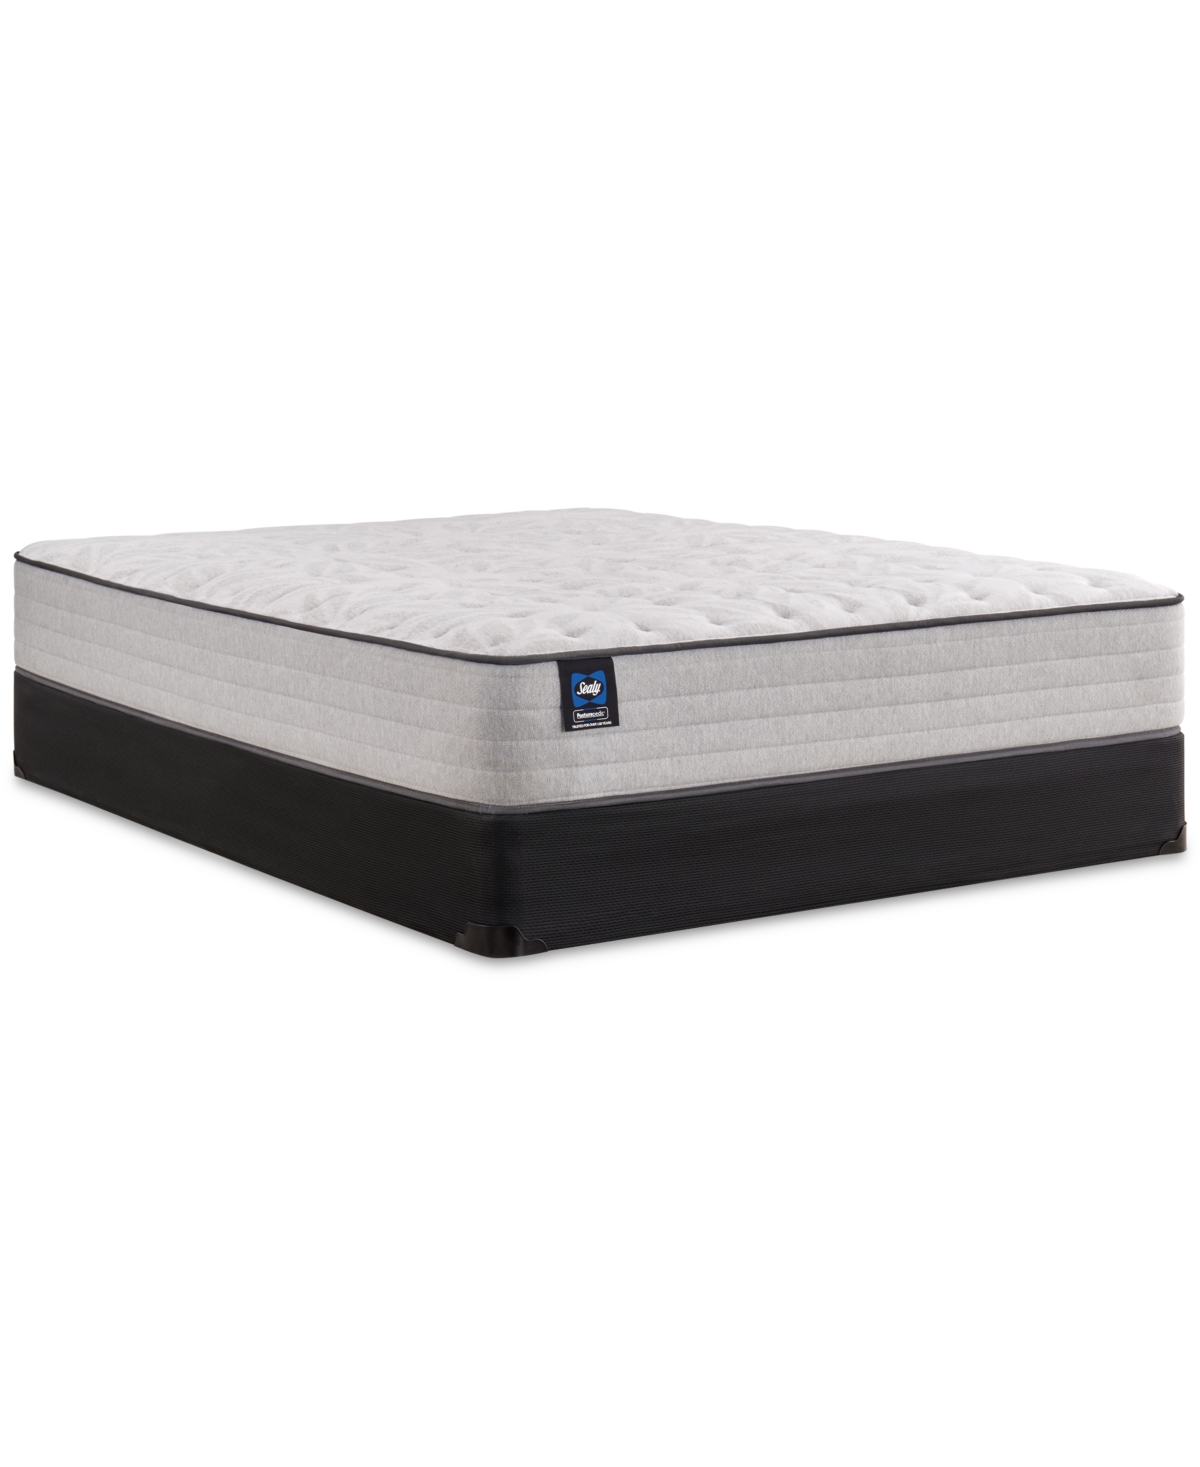 Sealy Spring Bloom Firm Tight Top 11.5" Mattress In No Color